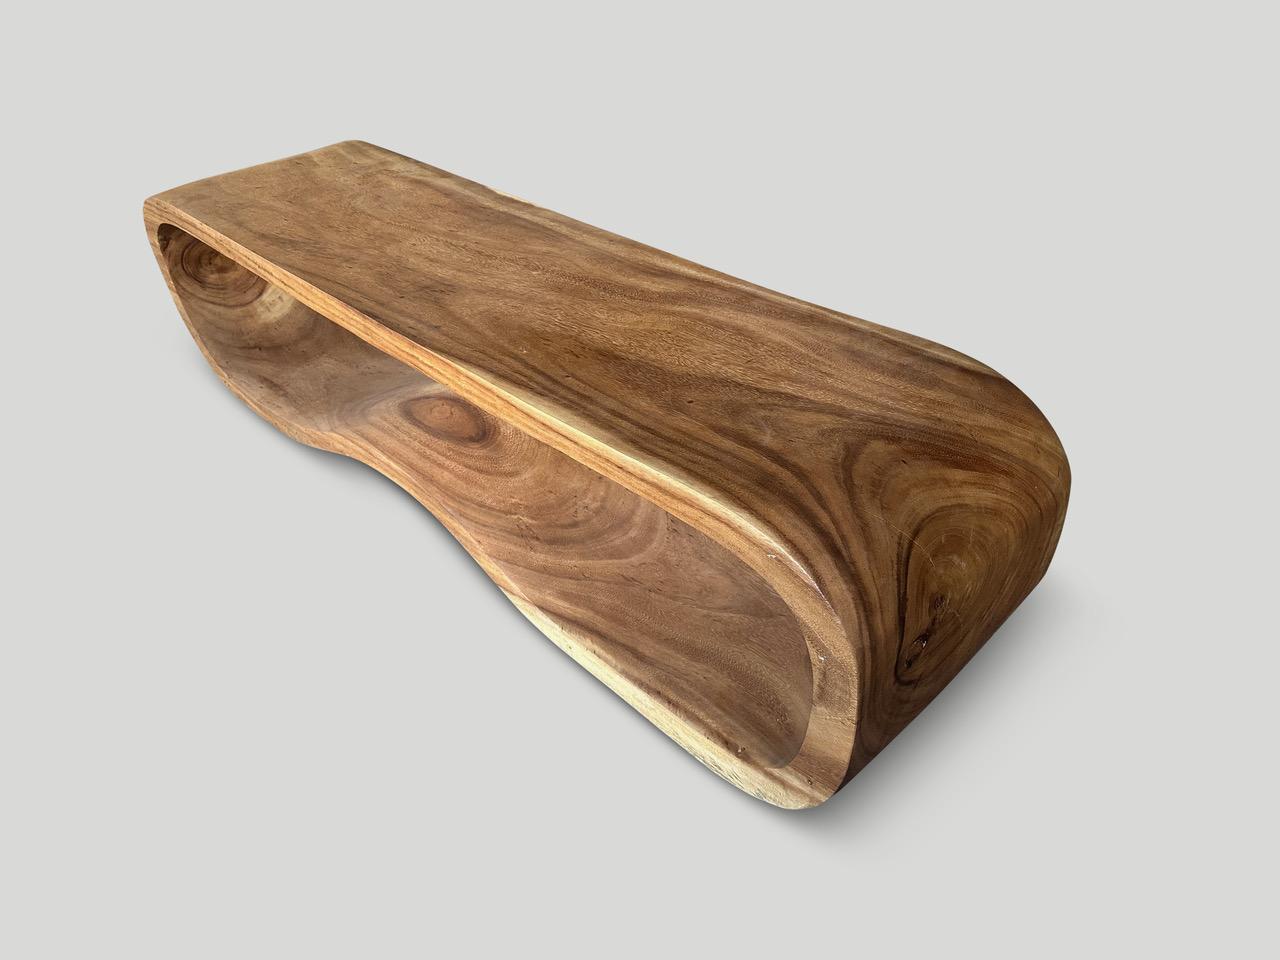 Indonesian Andrianna Shamaris Minimalist Sculptural Suar Wood Bench or Coffee Table For Sale